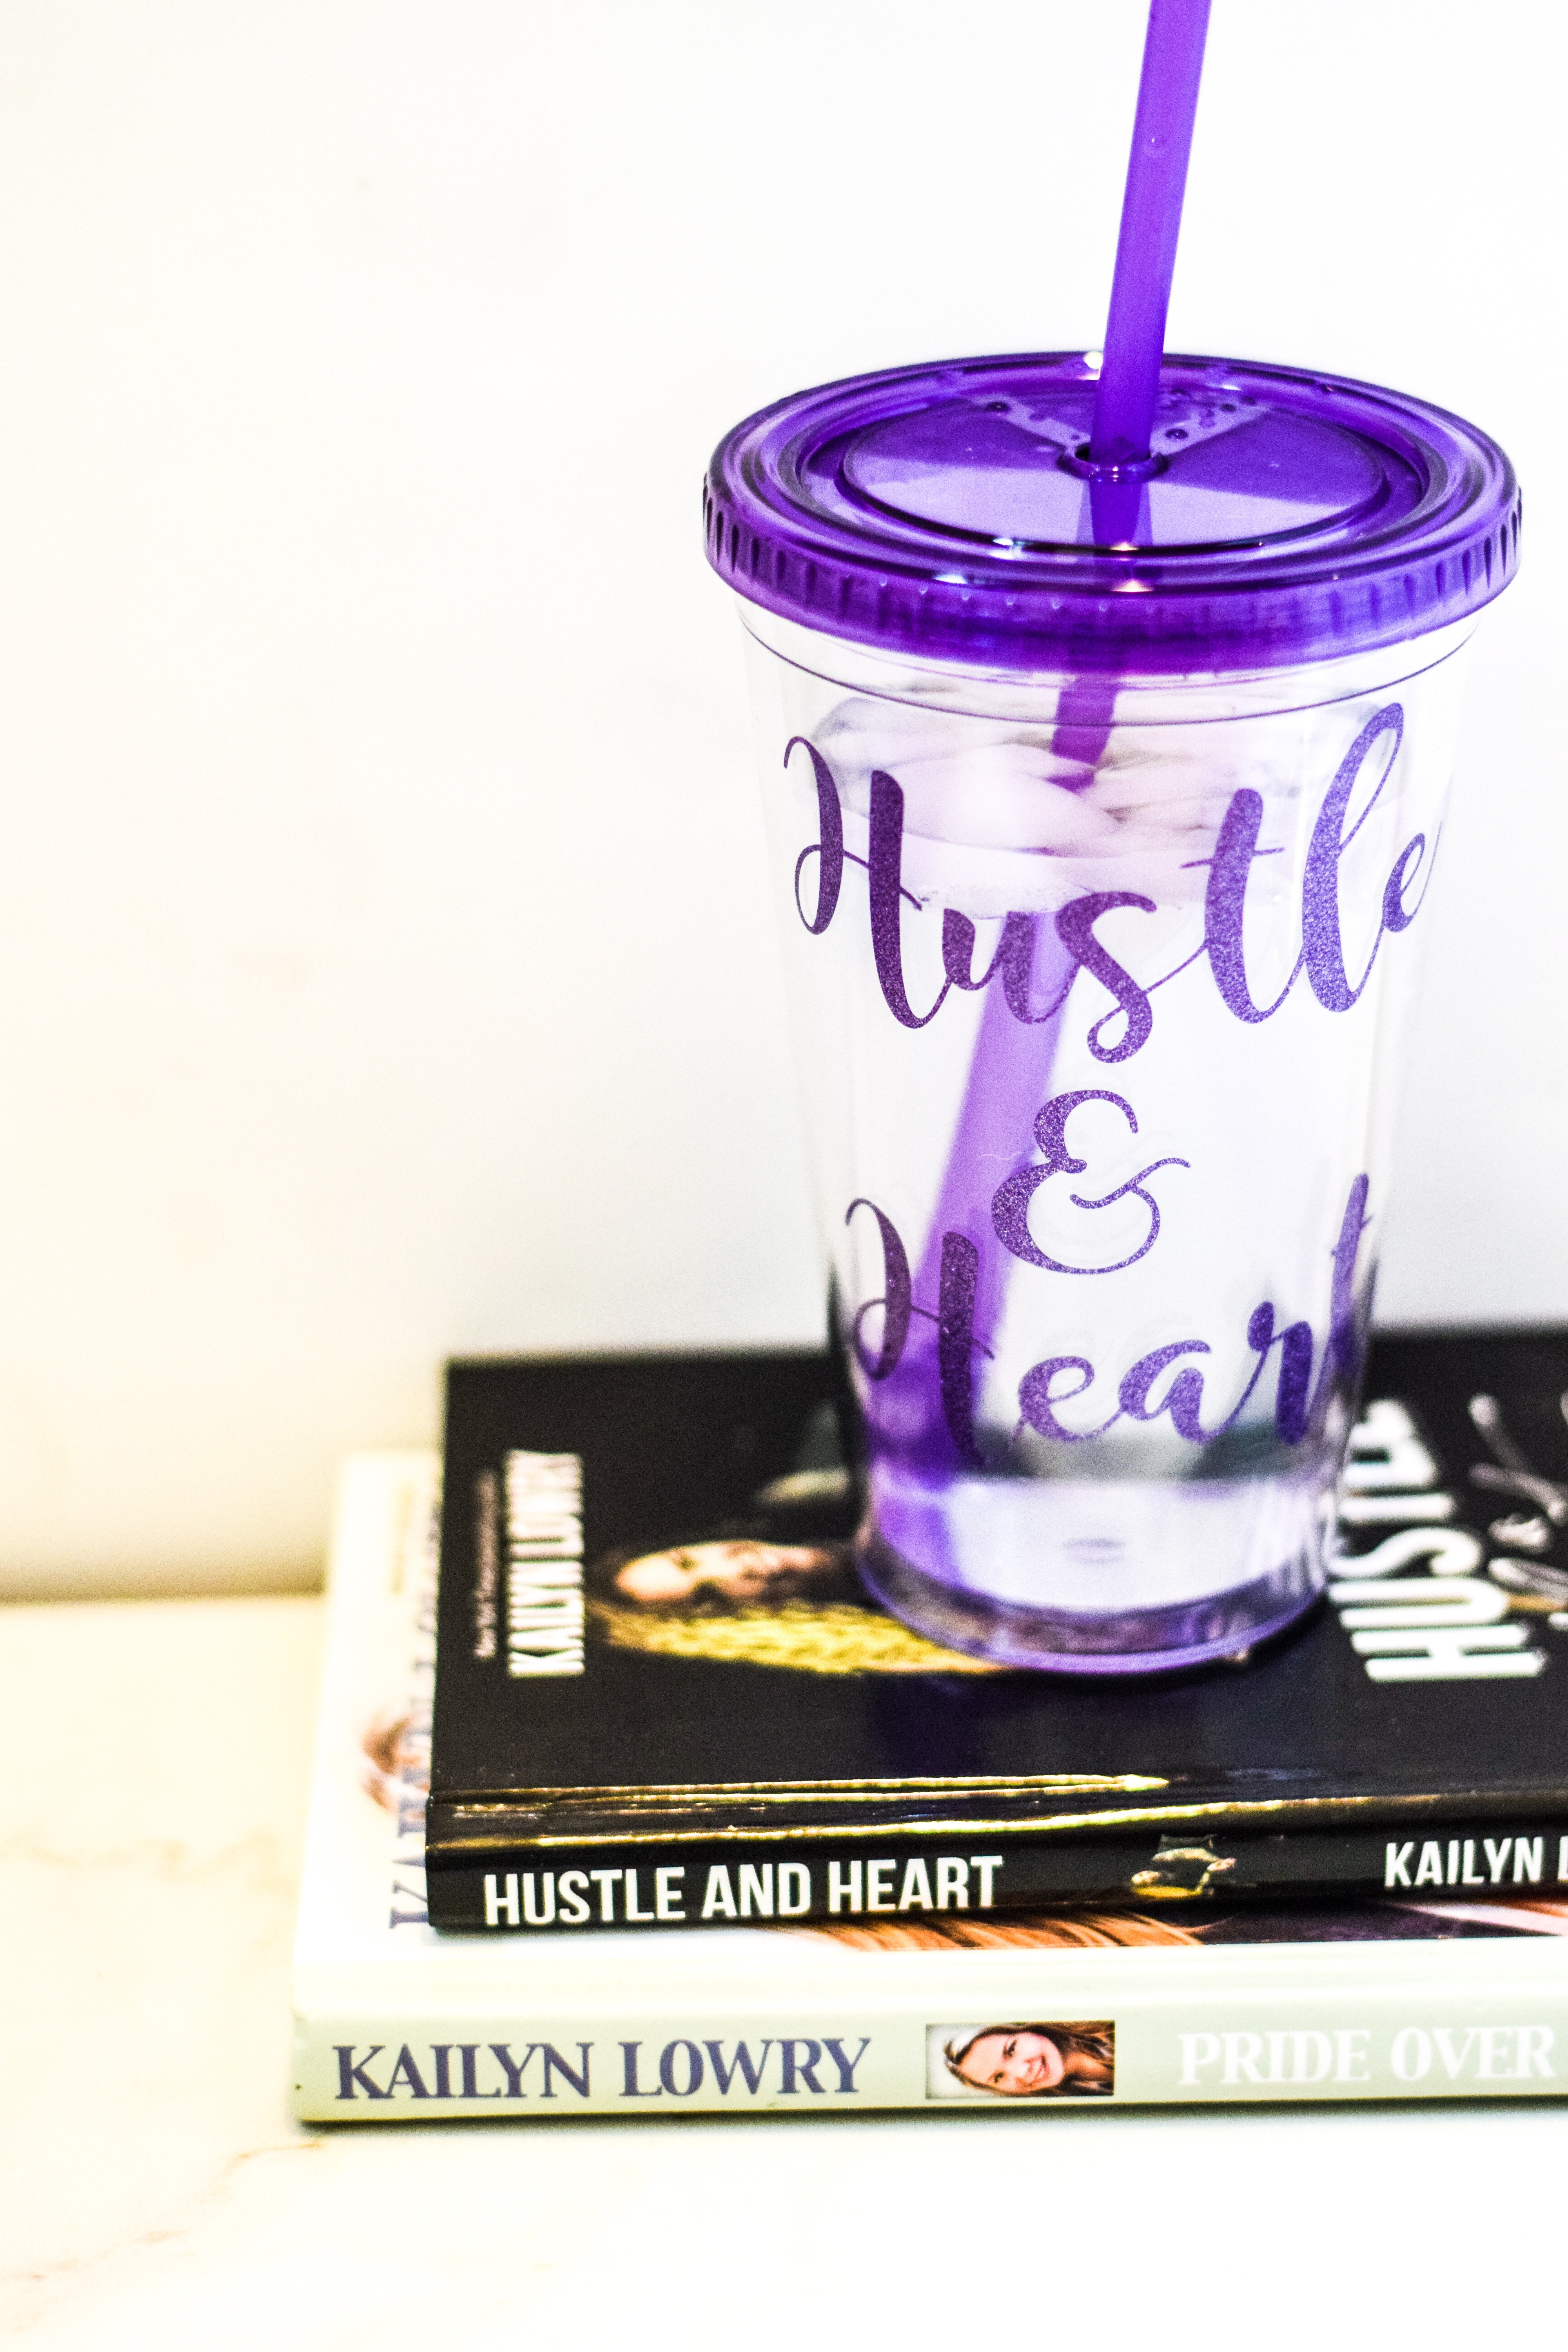 Kailyn Lowry Hustle and Heart